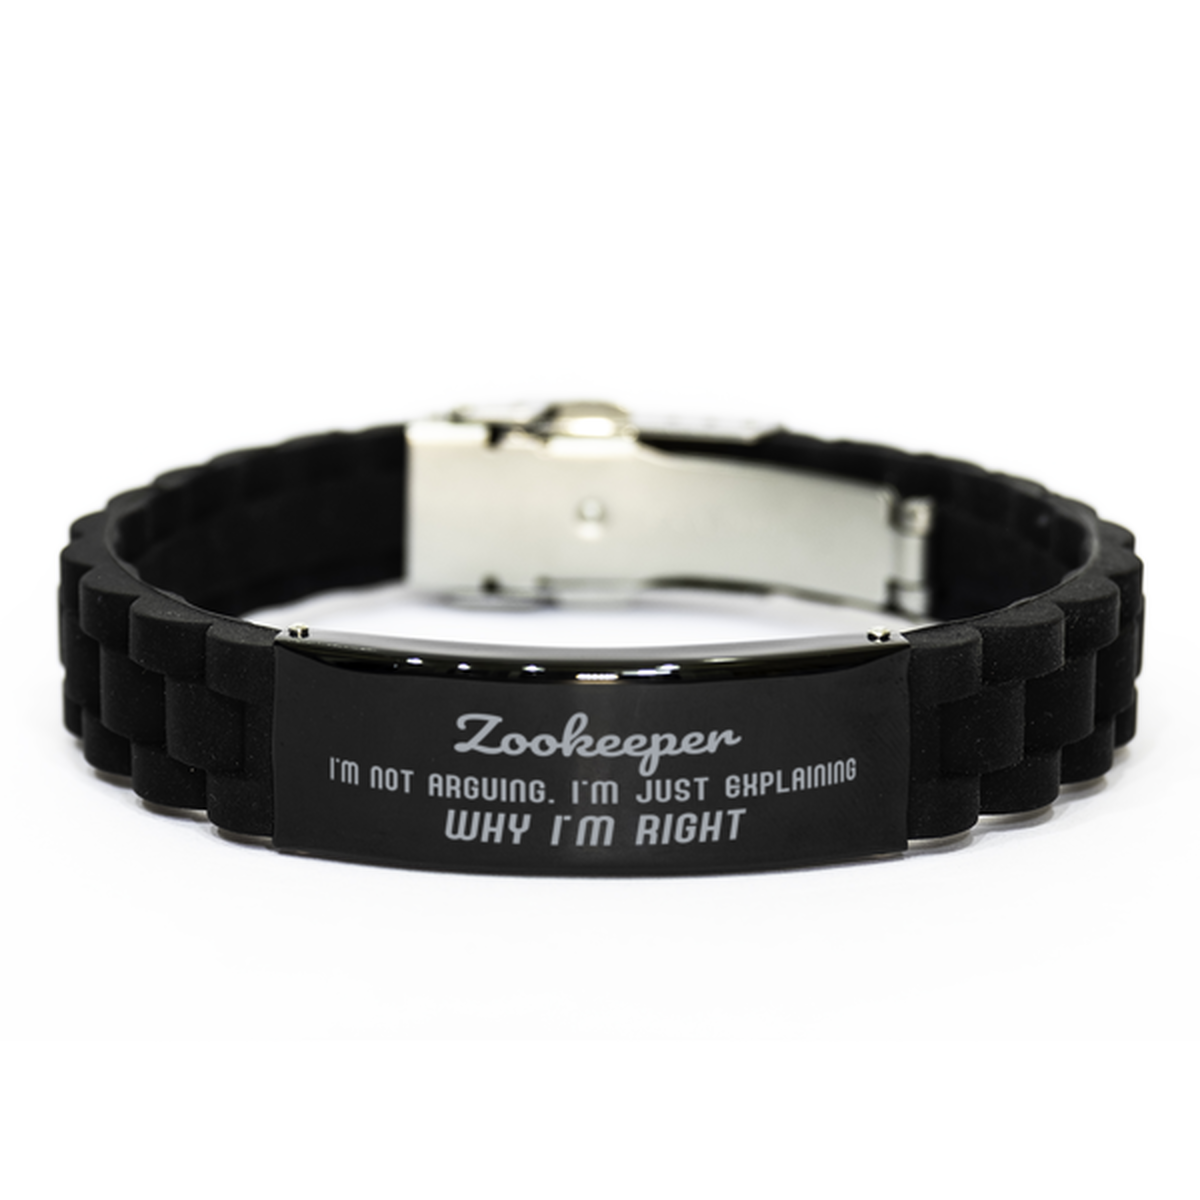 Zookeeper I'm not Arguing. I'm Just Explaining Why I'm RIGHT Black Glidelock Clasp Bracelet, Funny Saying Quote Zookeeper Gifts For Zookeeper Graduation Birthday Christmas Gifts for Men Women Coworker